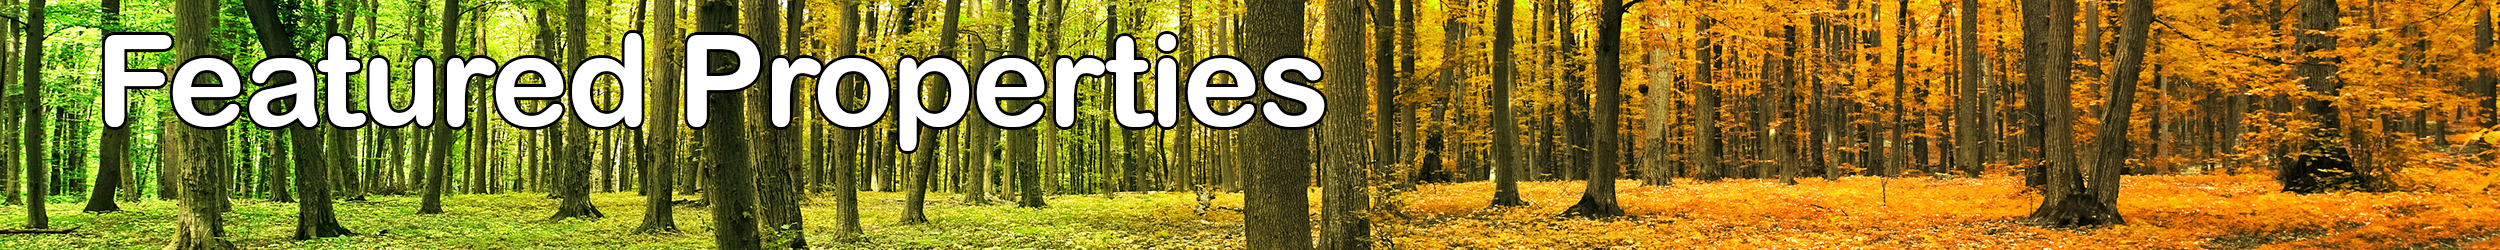 Featured Properties banner with summer trees changing to autumn